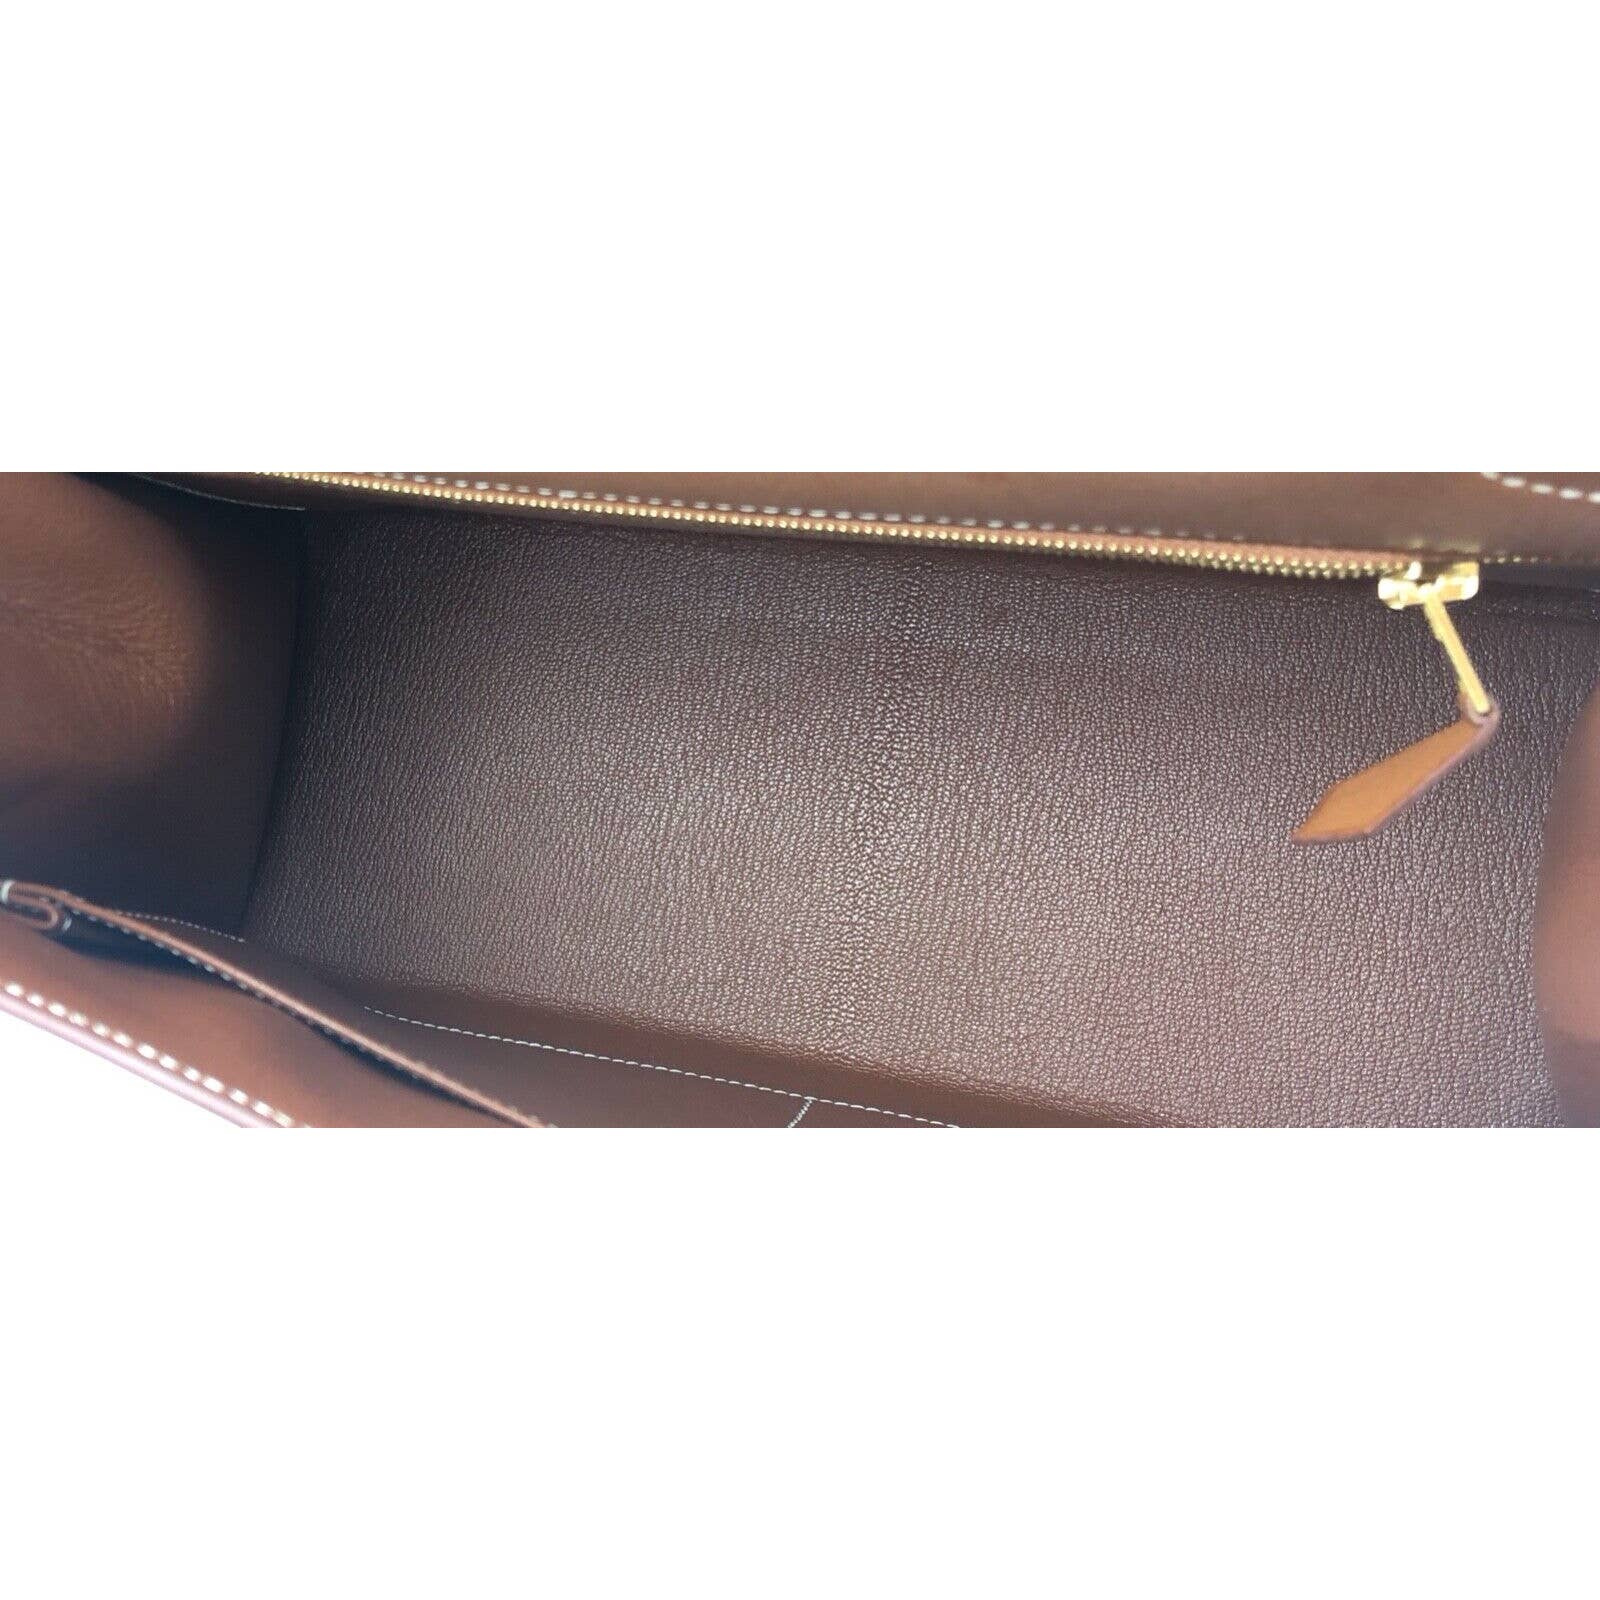 A FAUVE BARENIA LEATHER SELLIER KELLY 25 WITH GOLD HARDWARE